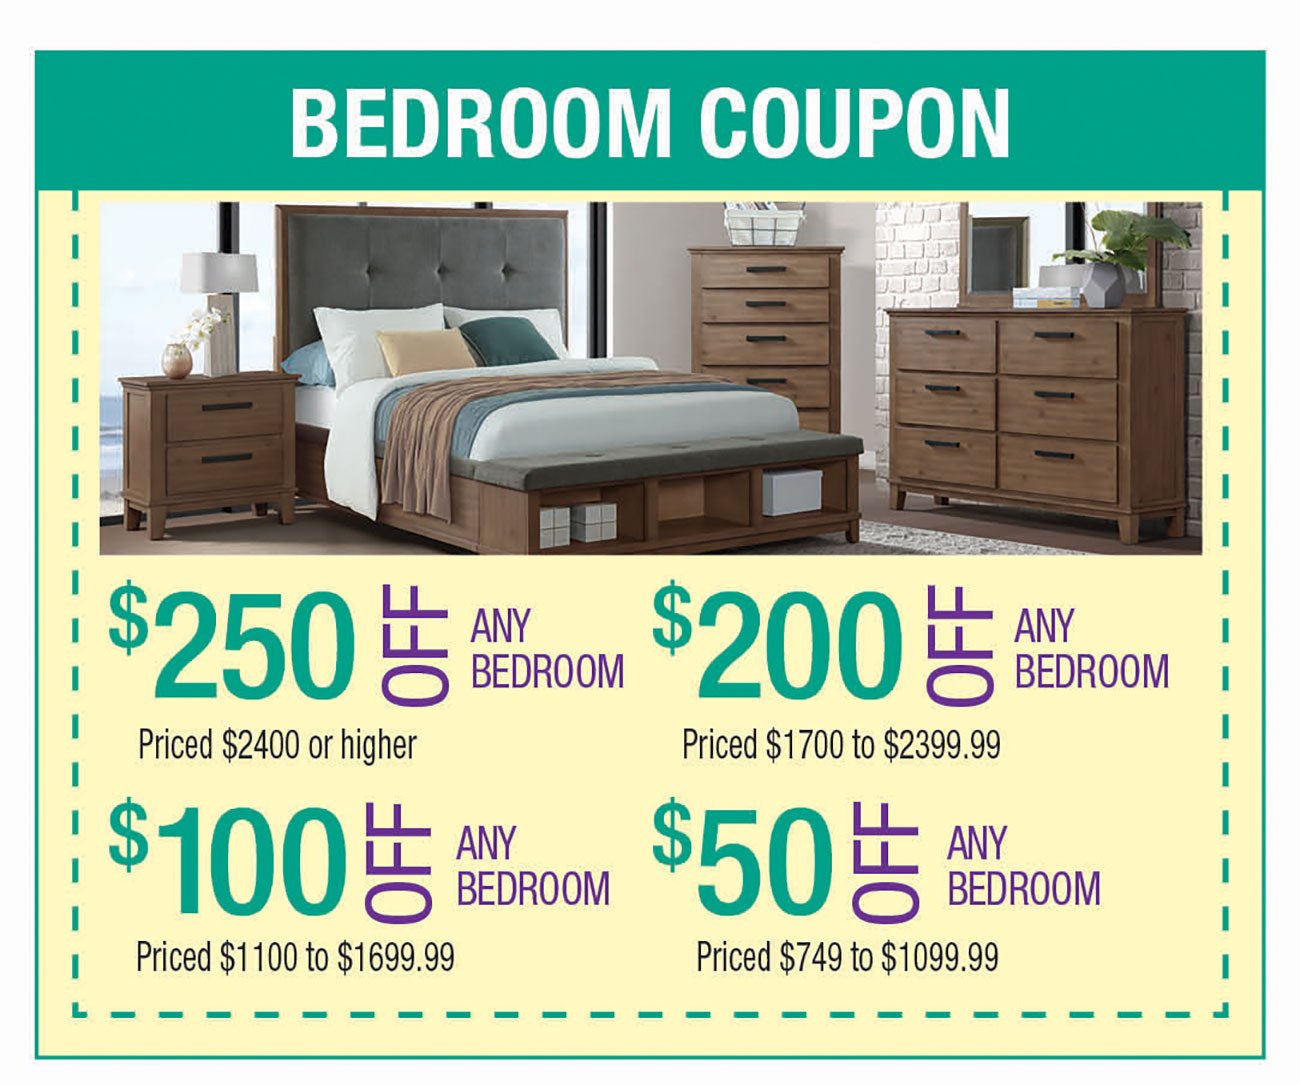 Bedroom-Coupon